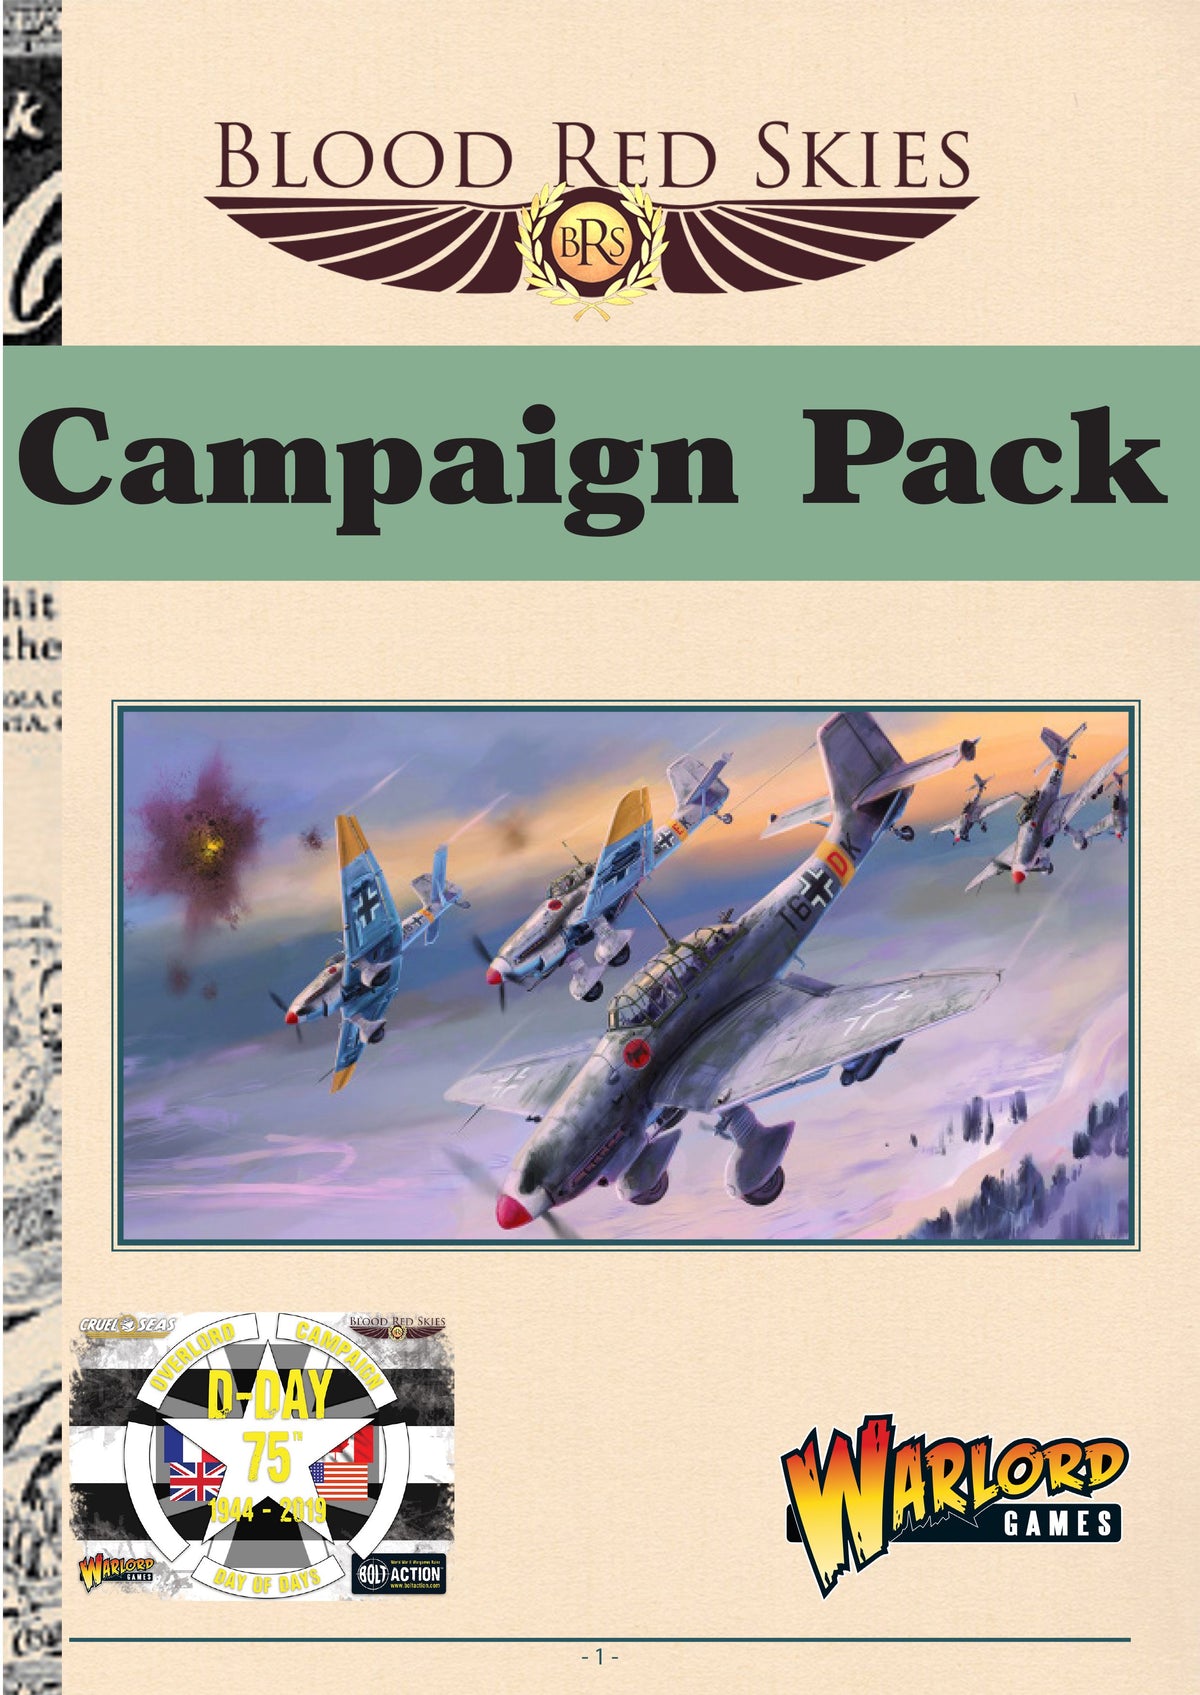 75th D-Day anniversary Campaign Pack - Blood Red Skies PDF